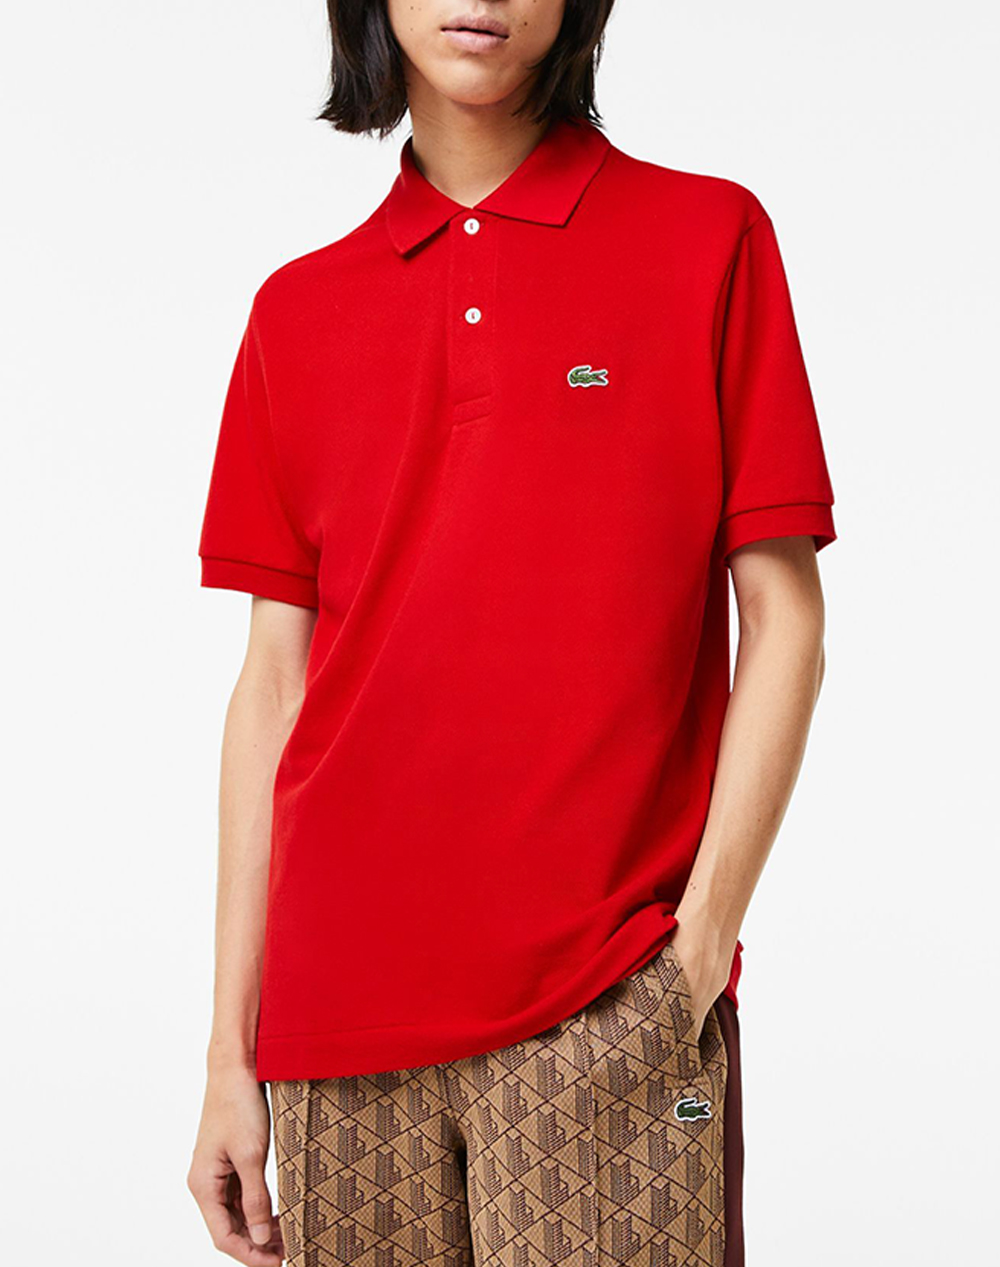 LACOSTE ΜΠΛΟΥΖΑ ΚΜ POLO SS 3L1212-240 Red